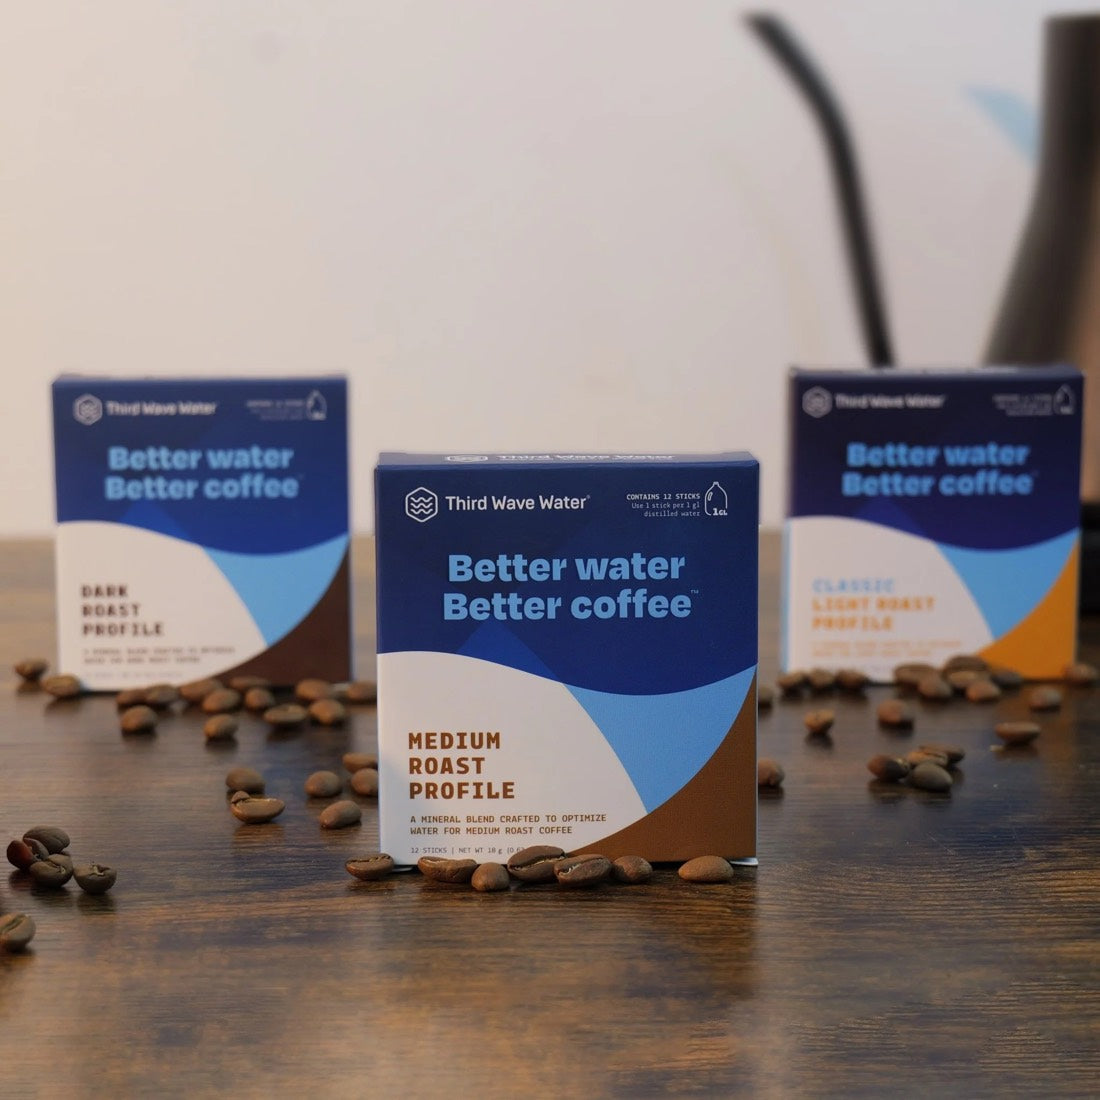 Third Wave Water - Medium Roast Profile - Mineral Packets - Image 5